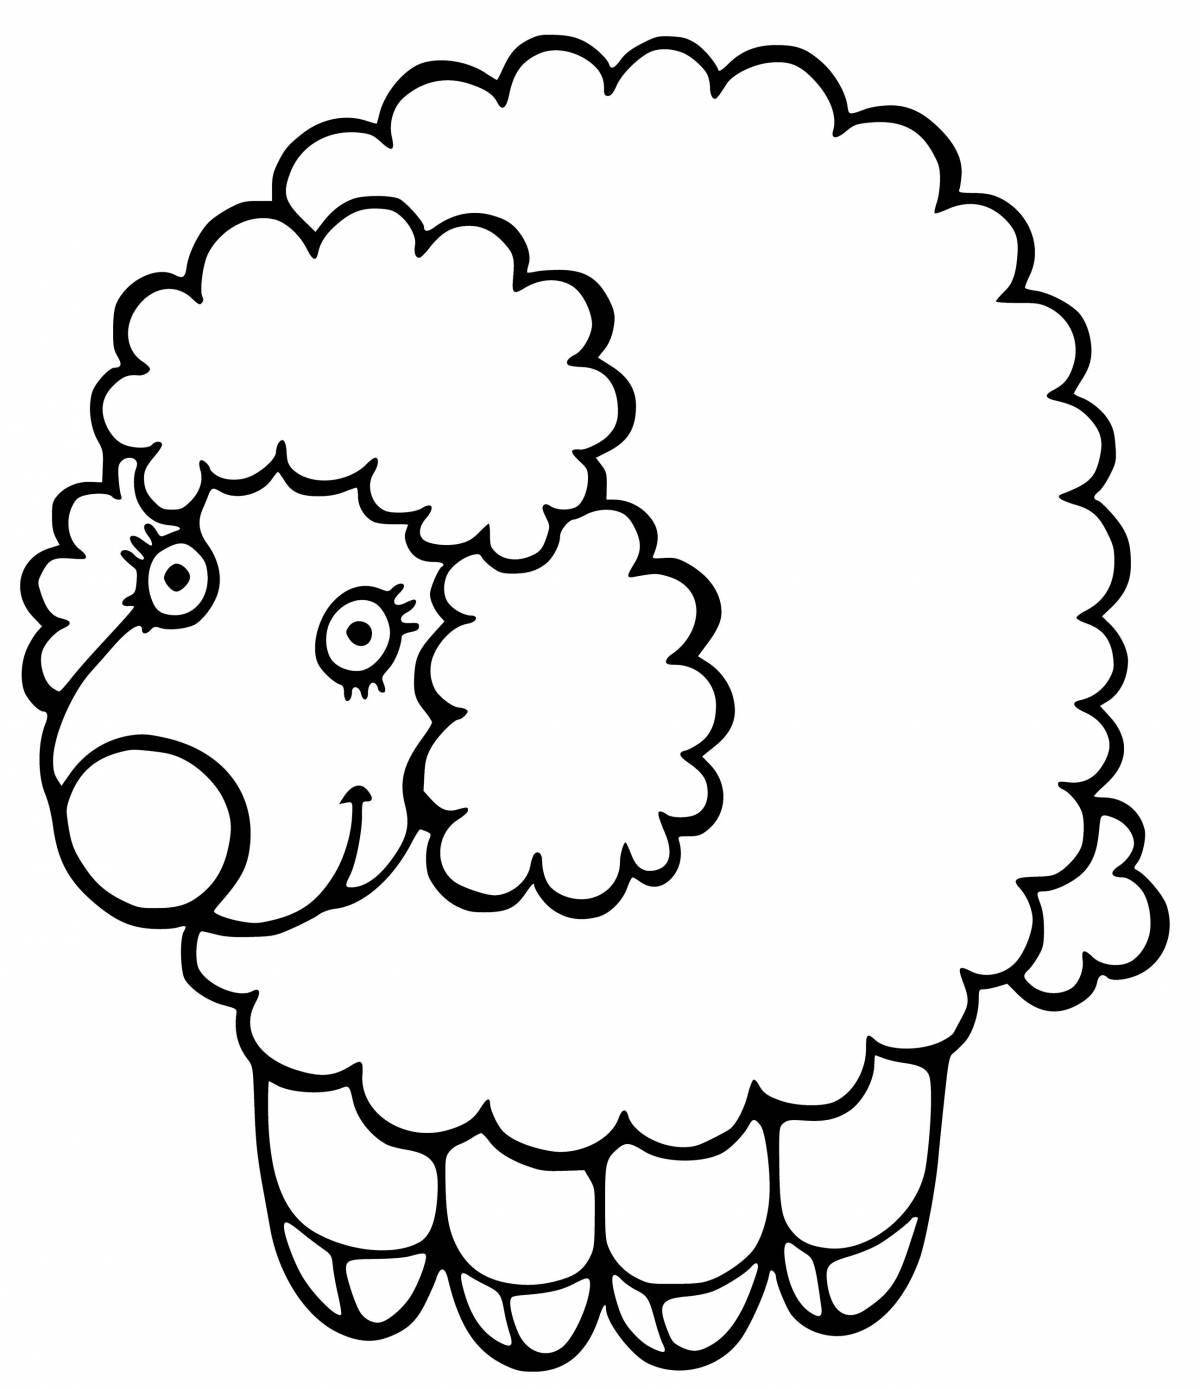 Fancy animal coloring pages for 2-3 year olds